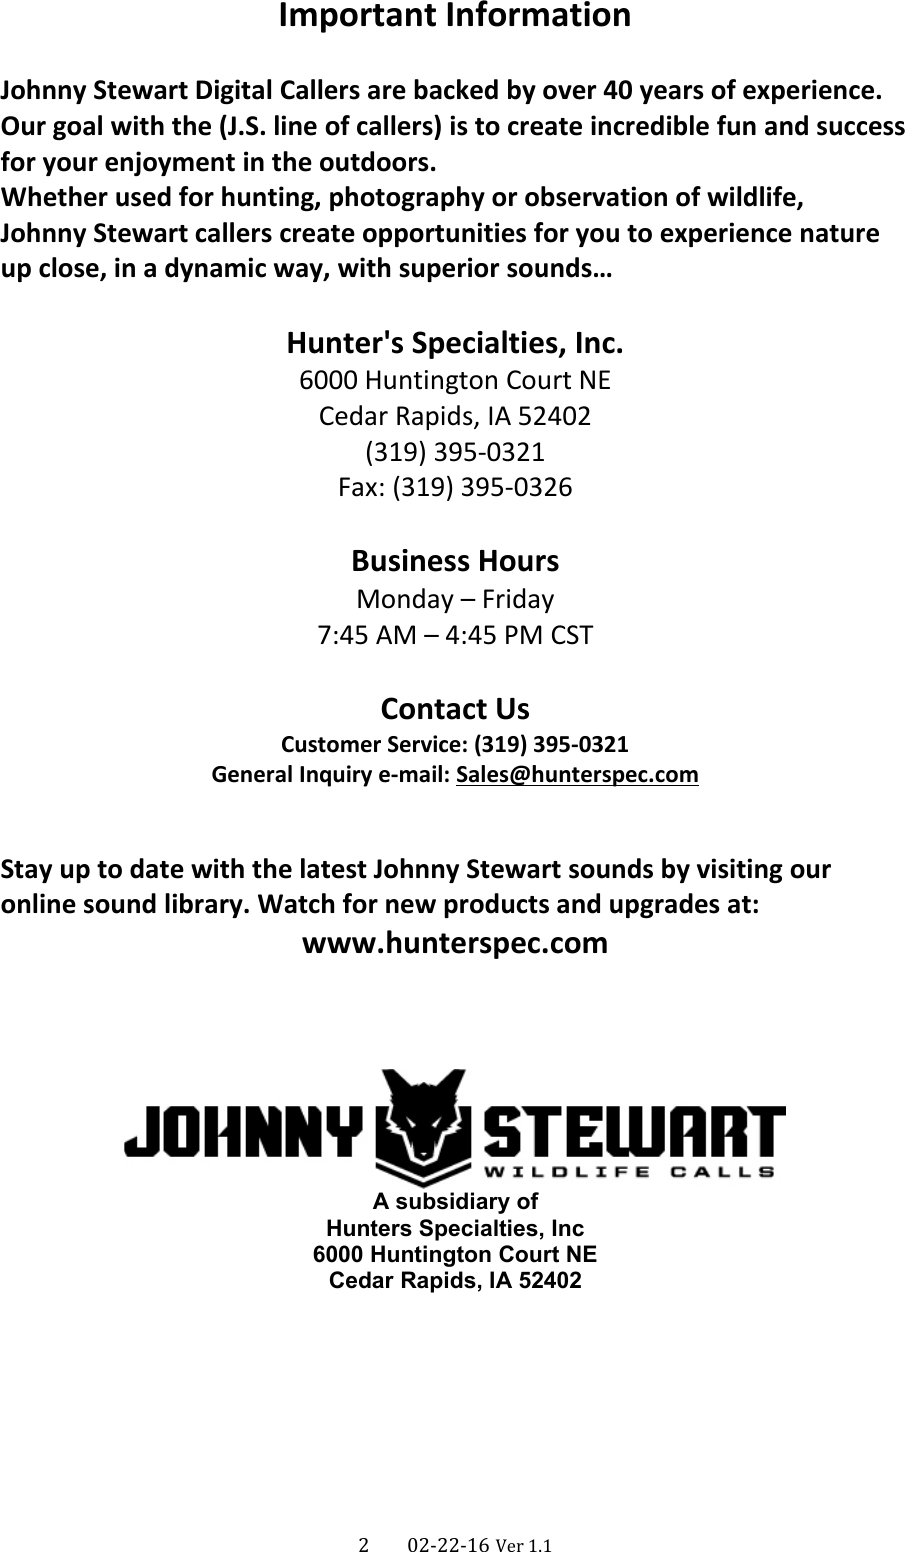 Important InformationJohnny Stewart Digital Callers are backed by over 40 years of experience.Our goal with the (J.S. line of callers) is to create incredible fun and successfor your enjoyment in the outdoors.Whether used for hunting, photography or observation of wildlife,Johnny Stewart callers create opportunities for you to experience nature up close, in a dynamic way, with superior sounds…Hunter&apos;s Specialties, Inc.6000 Huntington Court NECedar Rapids, IA 52402(319) 395-0321Fax: (319) 395-0326Business HoursMonday – Friday7:45 AM – 4:45 PM CSTContact UsCustomer Service: (319) 395-0321General Inquiry e-mail: Sales@hunterspec.comStay up to date with the latest Johnny Stewart sounds by visiting our online sound library. Watch for new products and upgrades at:www.hunterspec.comA subsidiary ofHunters Specialties, Inc6000 Huntington Court NECedar Rapids, IA 524022      02-22-16 Ver 1.1